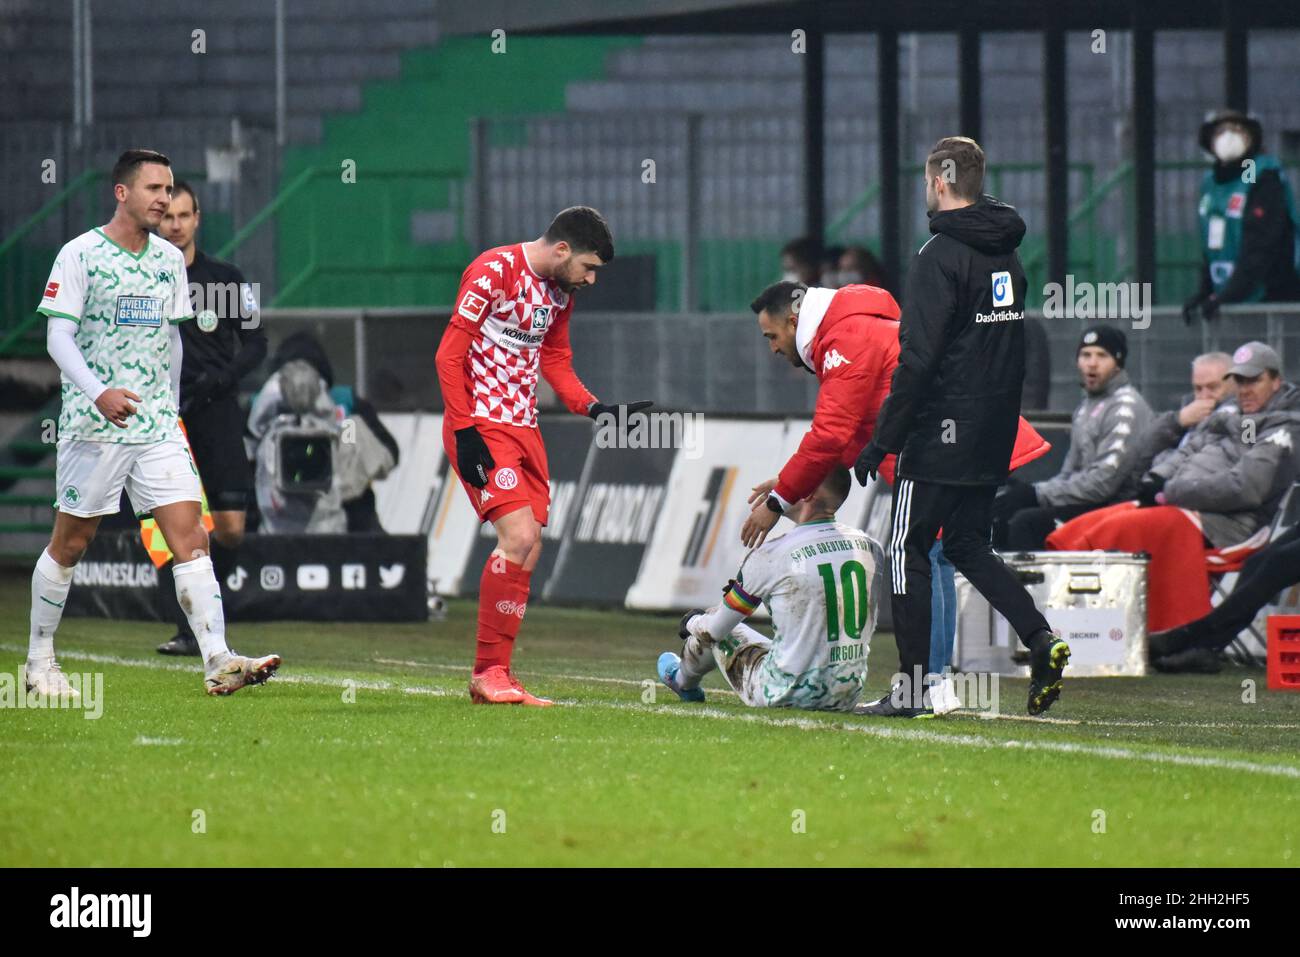 Germany ,Fuerth, Sportpark Ronhof Thomas Sommer - 22 Jan 2022 - Fussball, 1.Bundesliga - SpVgg Greuther Fuerth vs. FSV Mainz 05  Image: Branimir Hrgota (SpVgg Greuther Fürth,10) sitting on the ground after being fouled; Aaron Martin (Mainz, 3) making a hand gesture indicating that he didn’t foul him.  DFL regulations prohibit any use of photographs as image sequences and or quasi-video Stock Photo